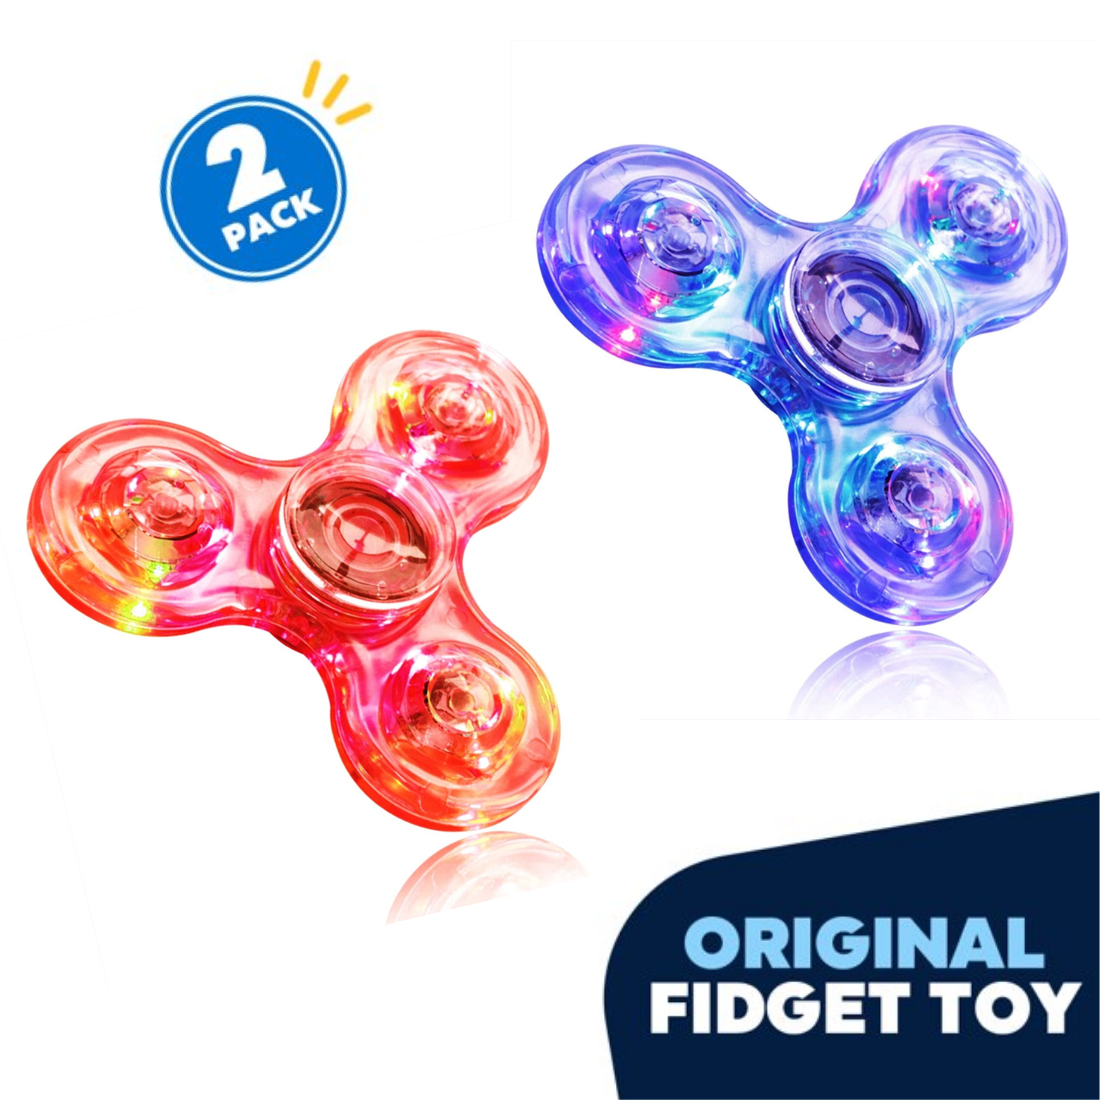 3D Fidget Hand Spinner Finger EDC Focus Stress Reliever Toys For Kids Adults AU 